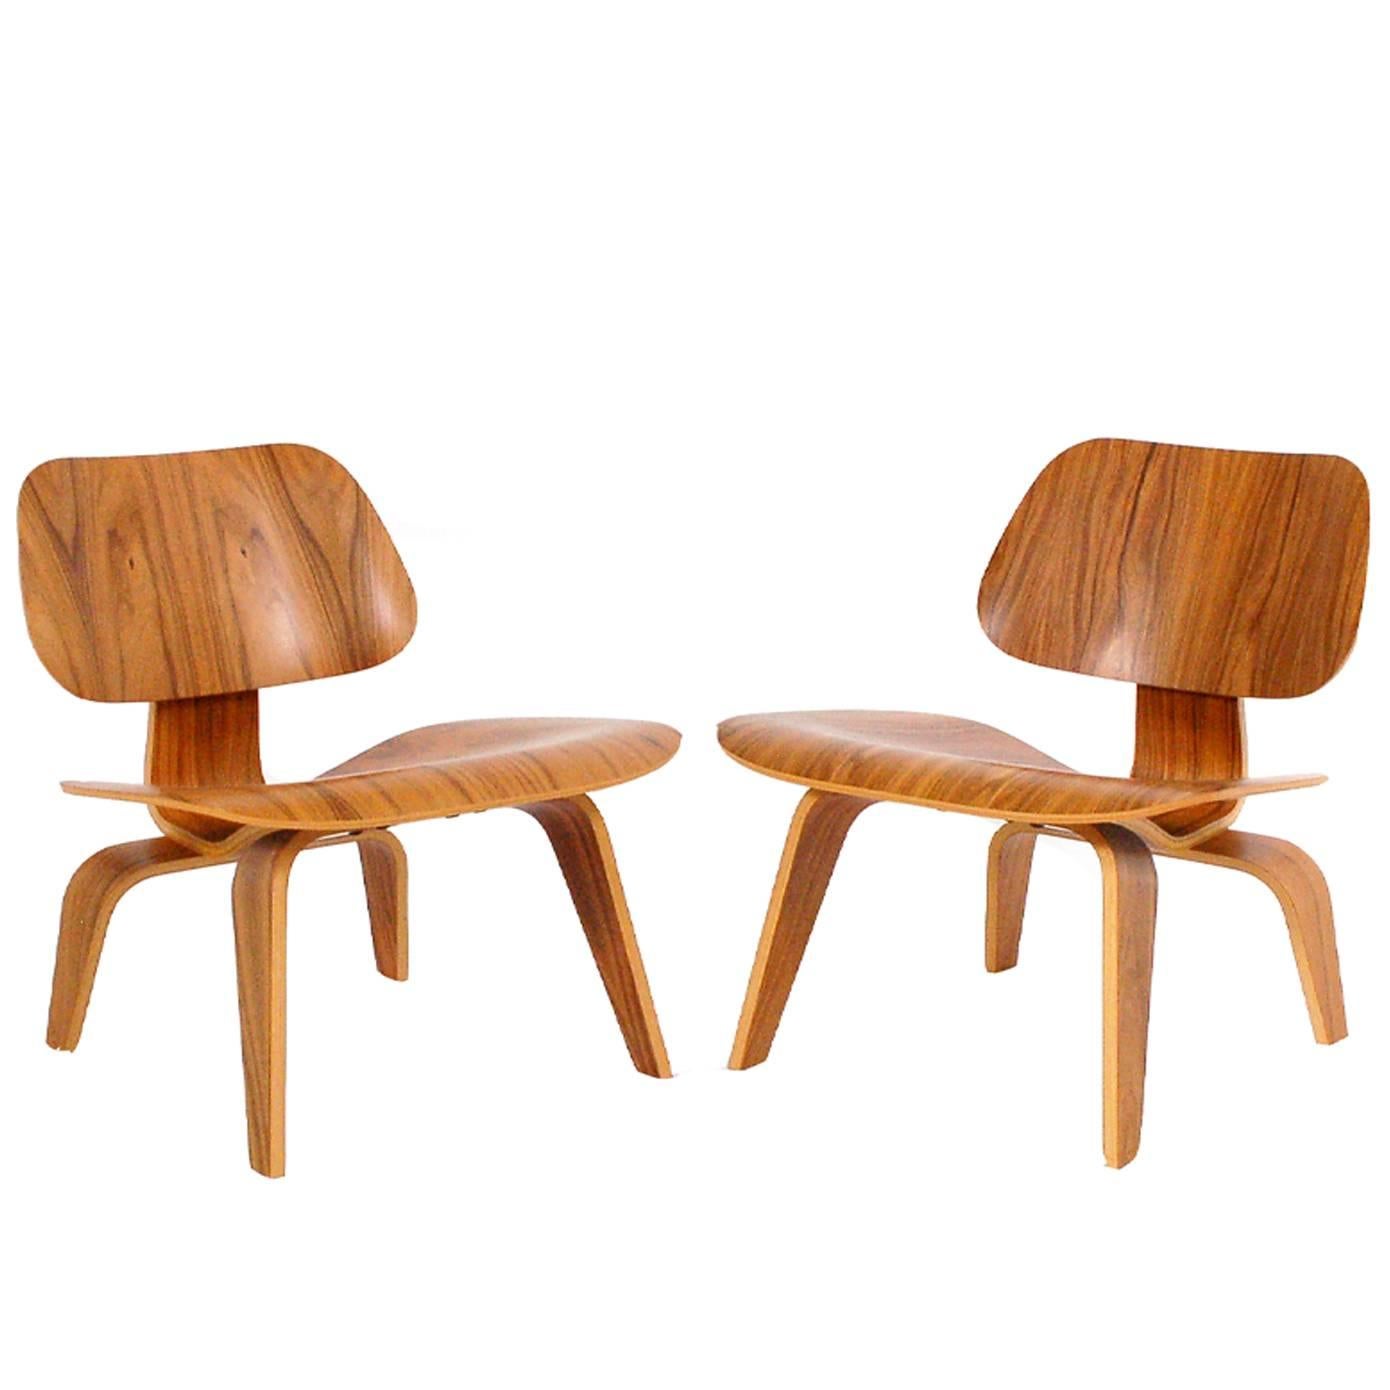 Two LCW Lounge Chairs by Charles Eames